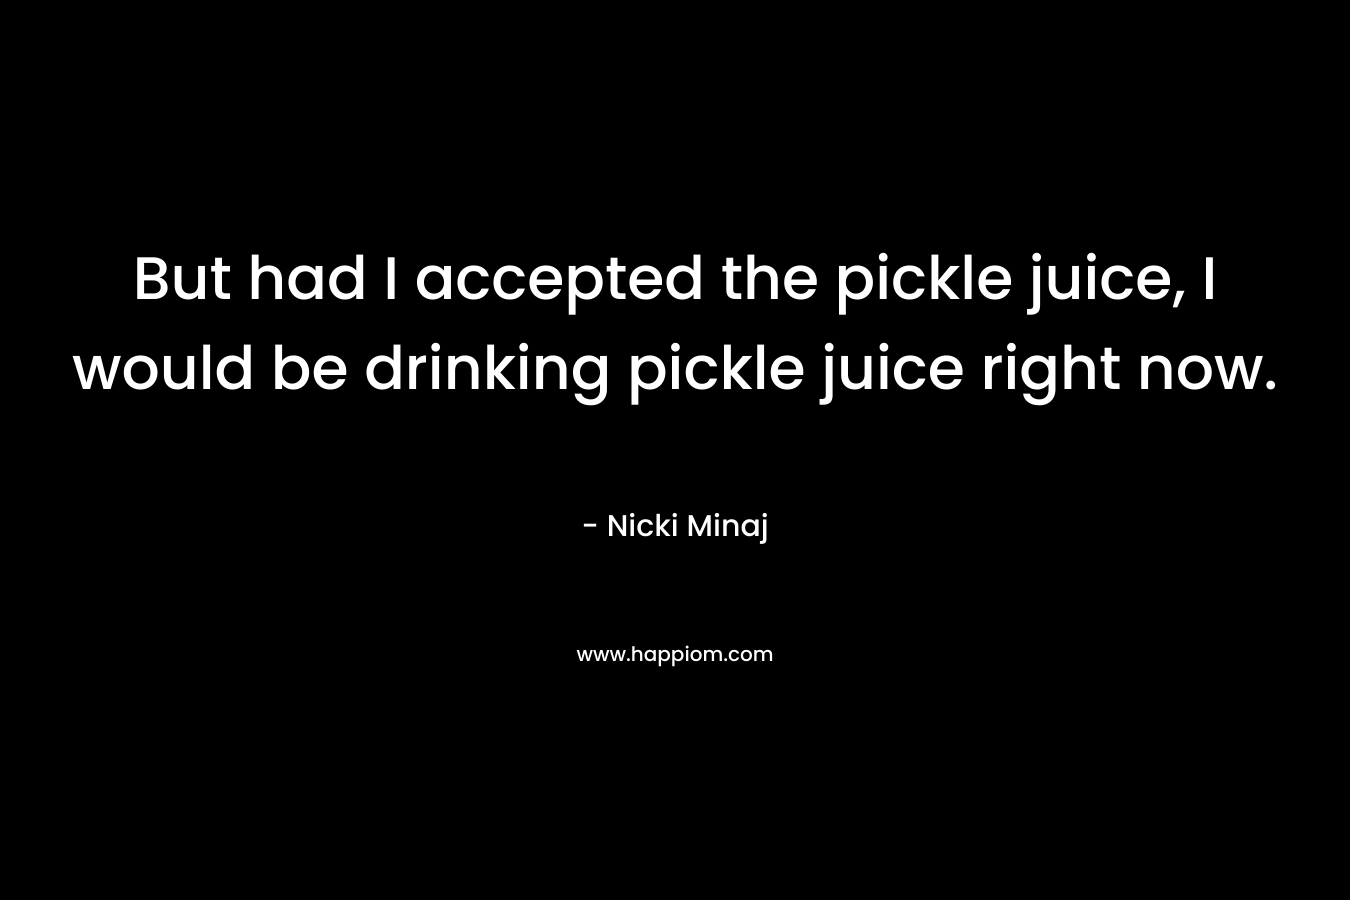 But had I accepted the pickle juice, I would be drinking pickle juice right now. – Nicki Minaj